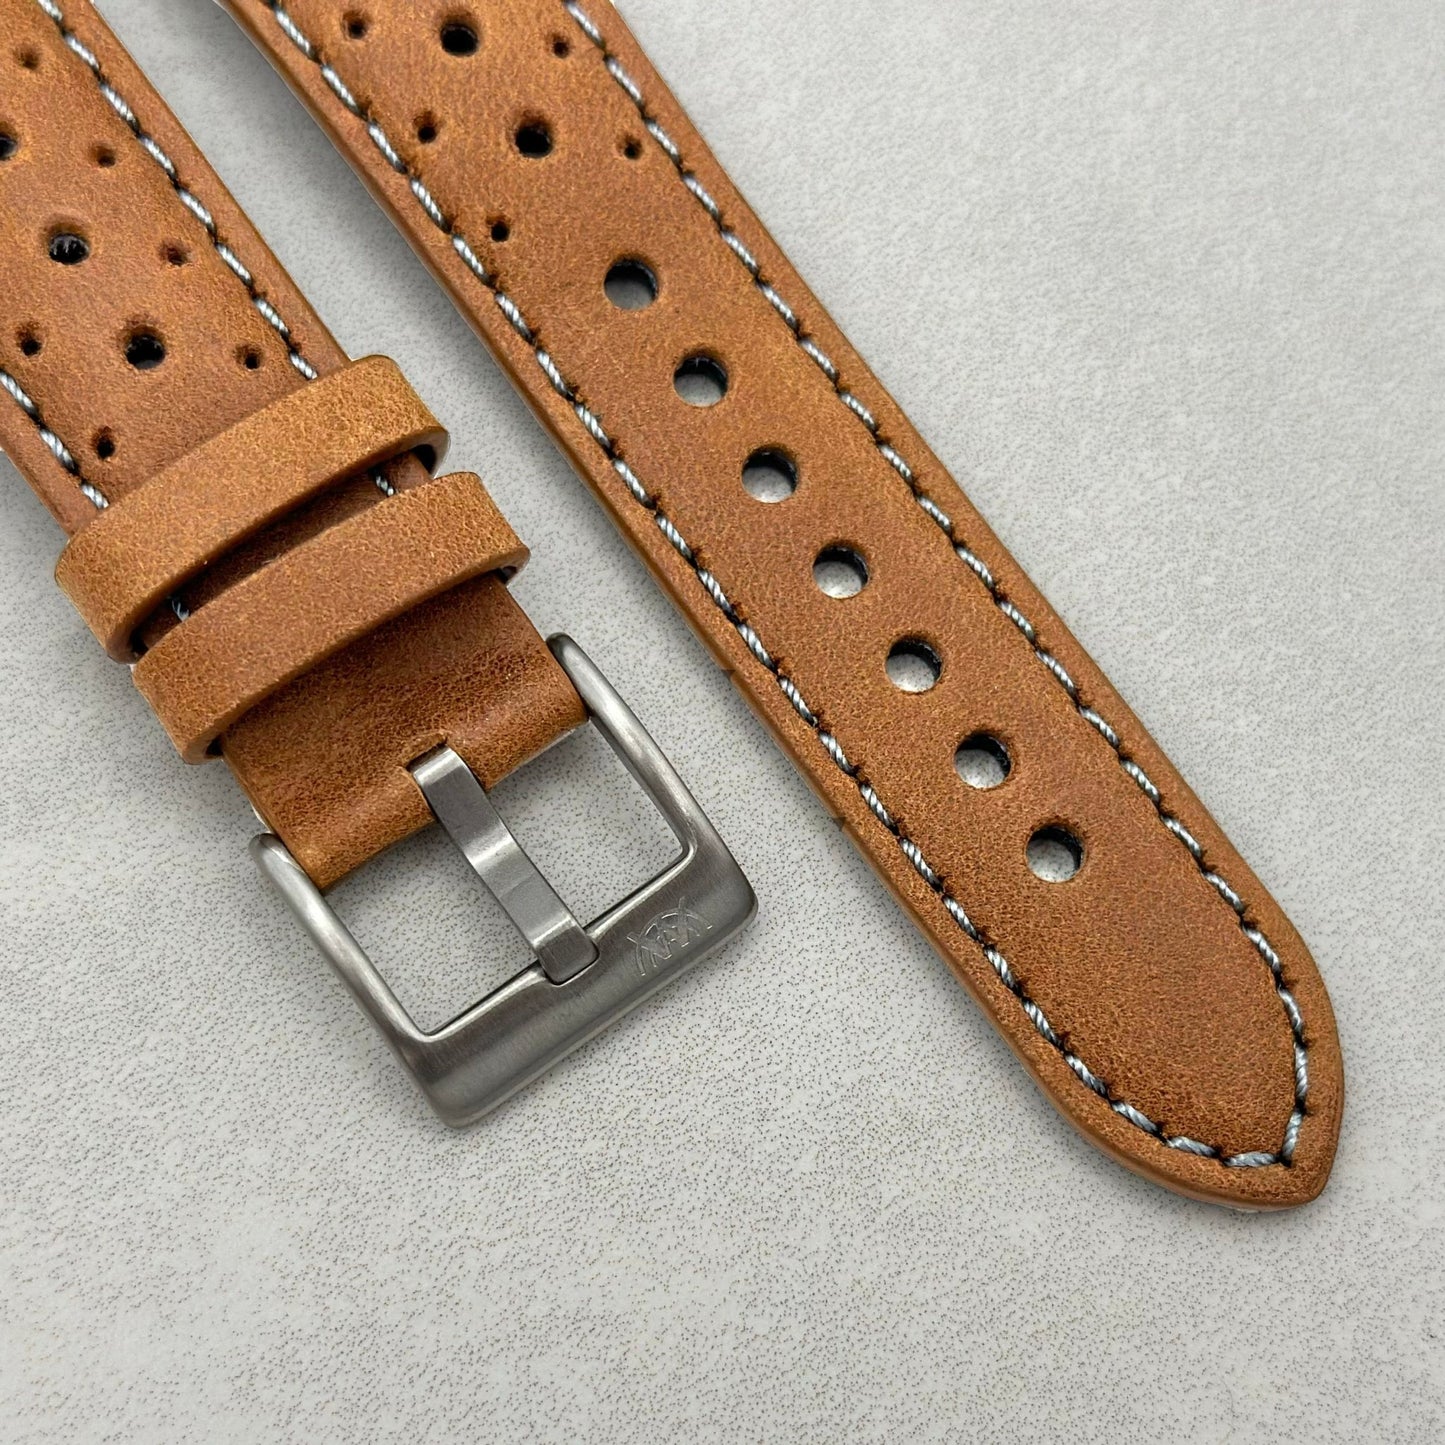 The Monte Carlo: Vintage Tan Perforated Leather Fitbit Versa/Sense Watch Strap